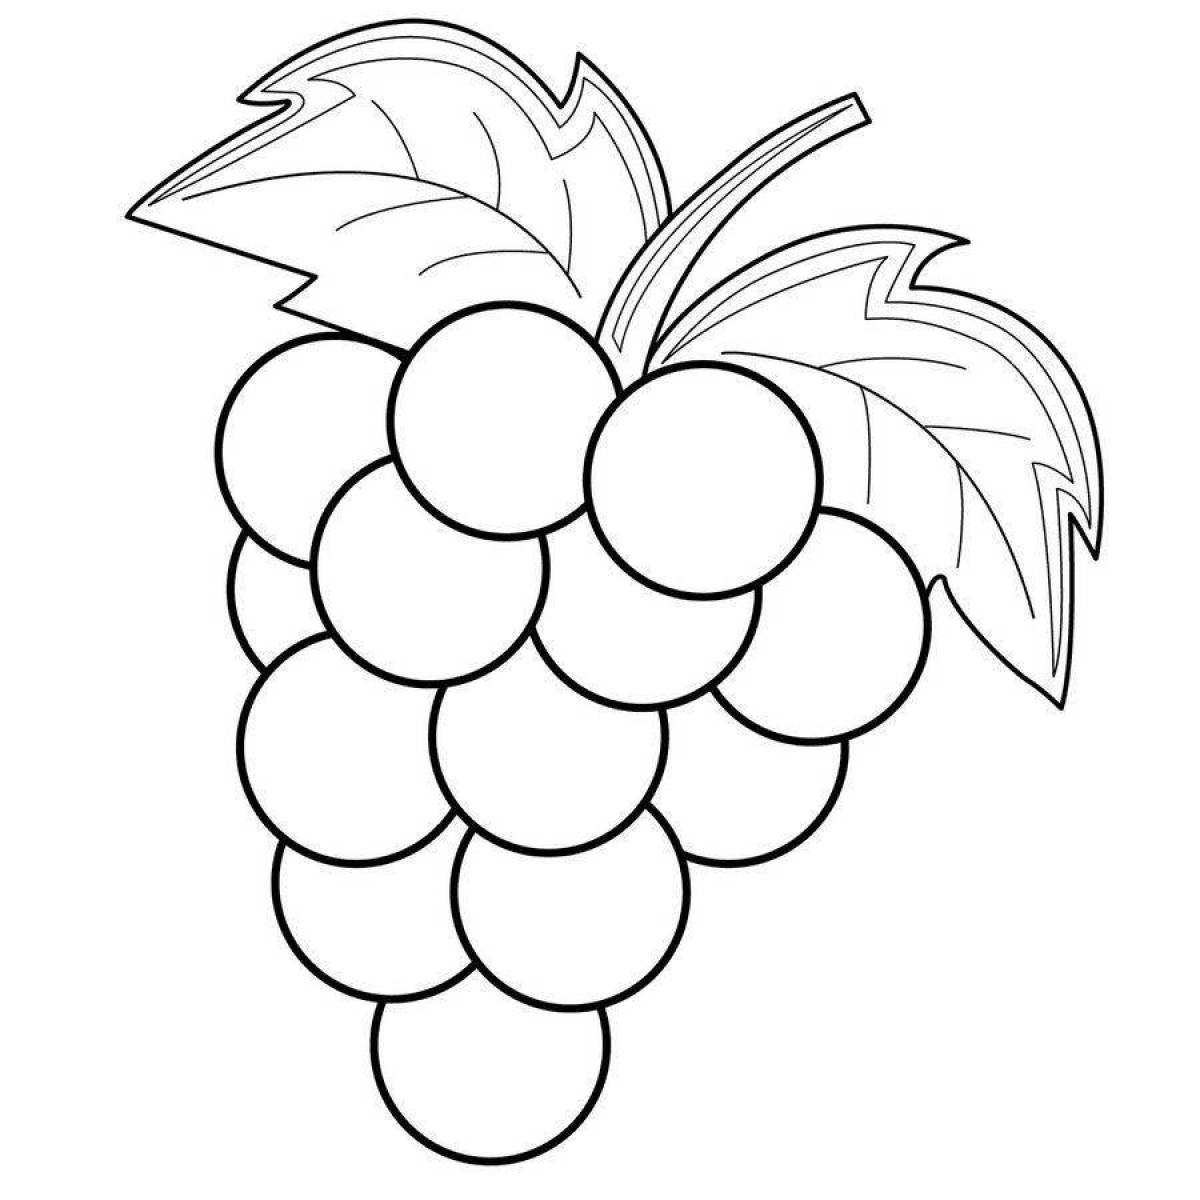 Lively coloring grapes for children